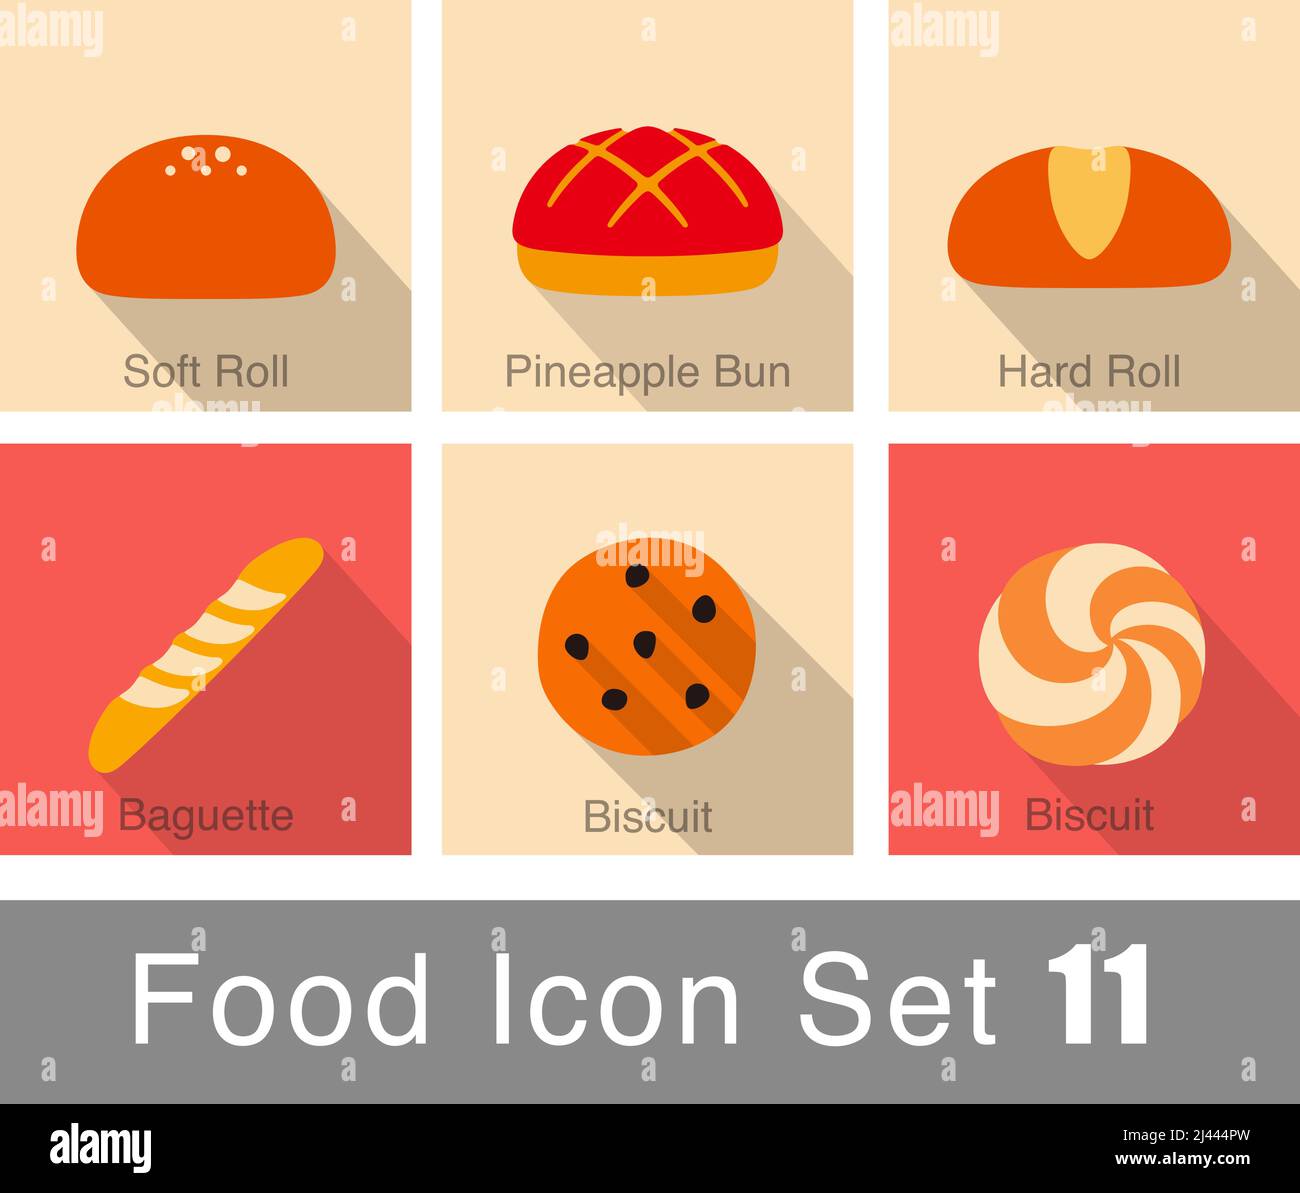 Bakery icon set, bread, biscuit snack icon set design, vector illustration Stock Vector